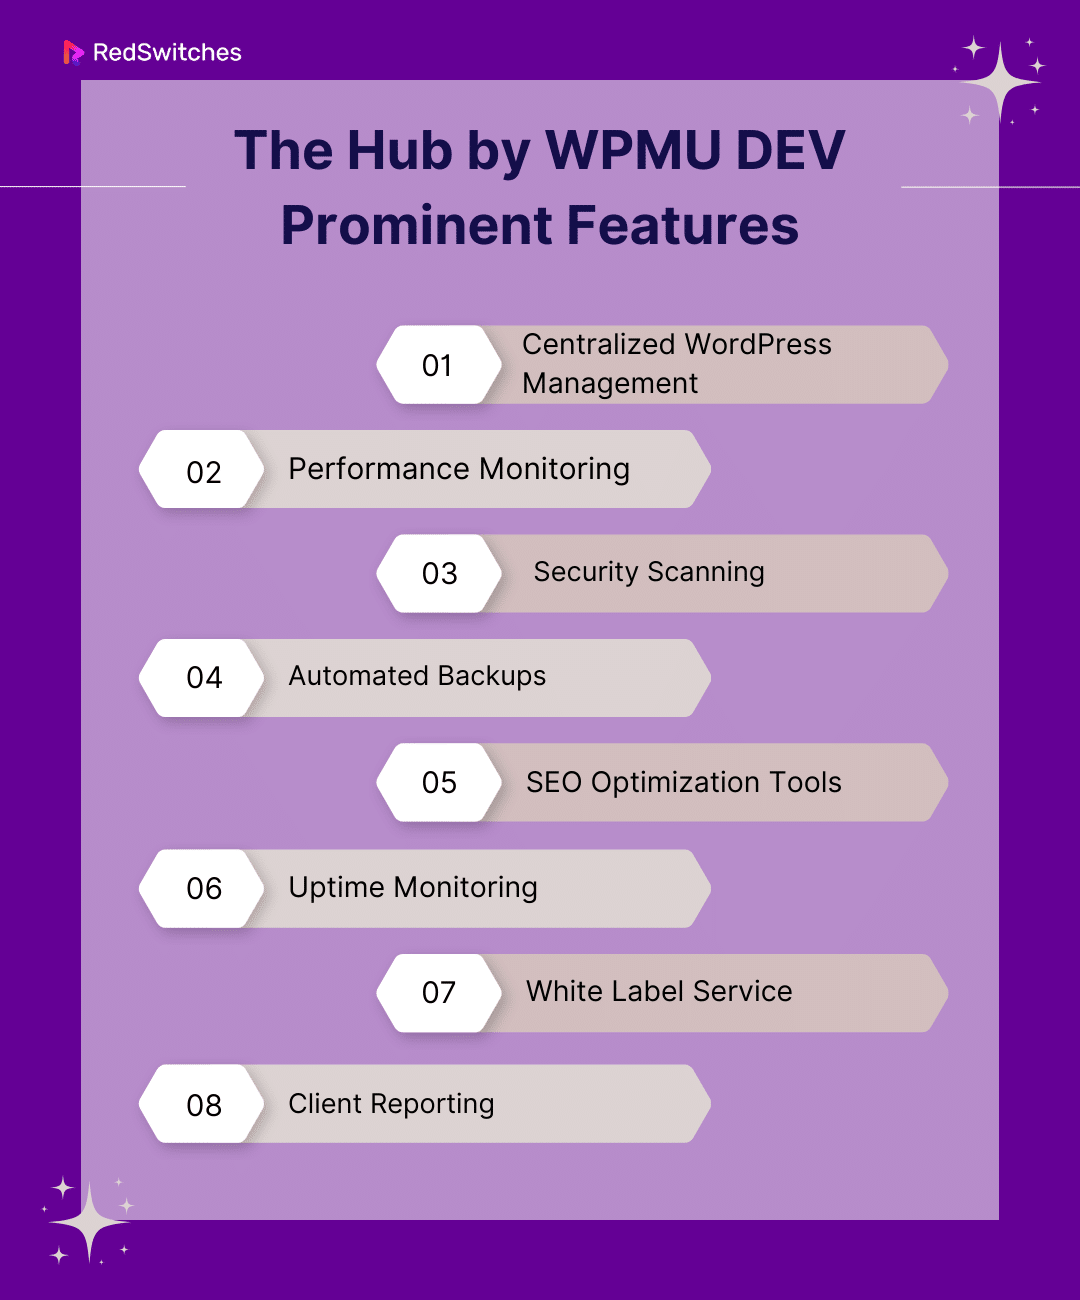 The Hub by WPMU DEV Prominent Features